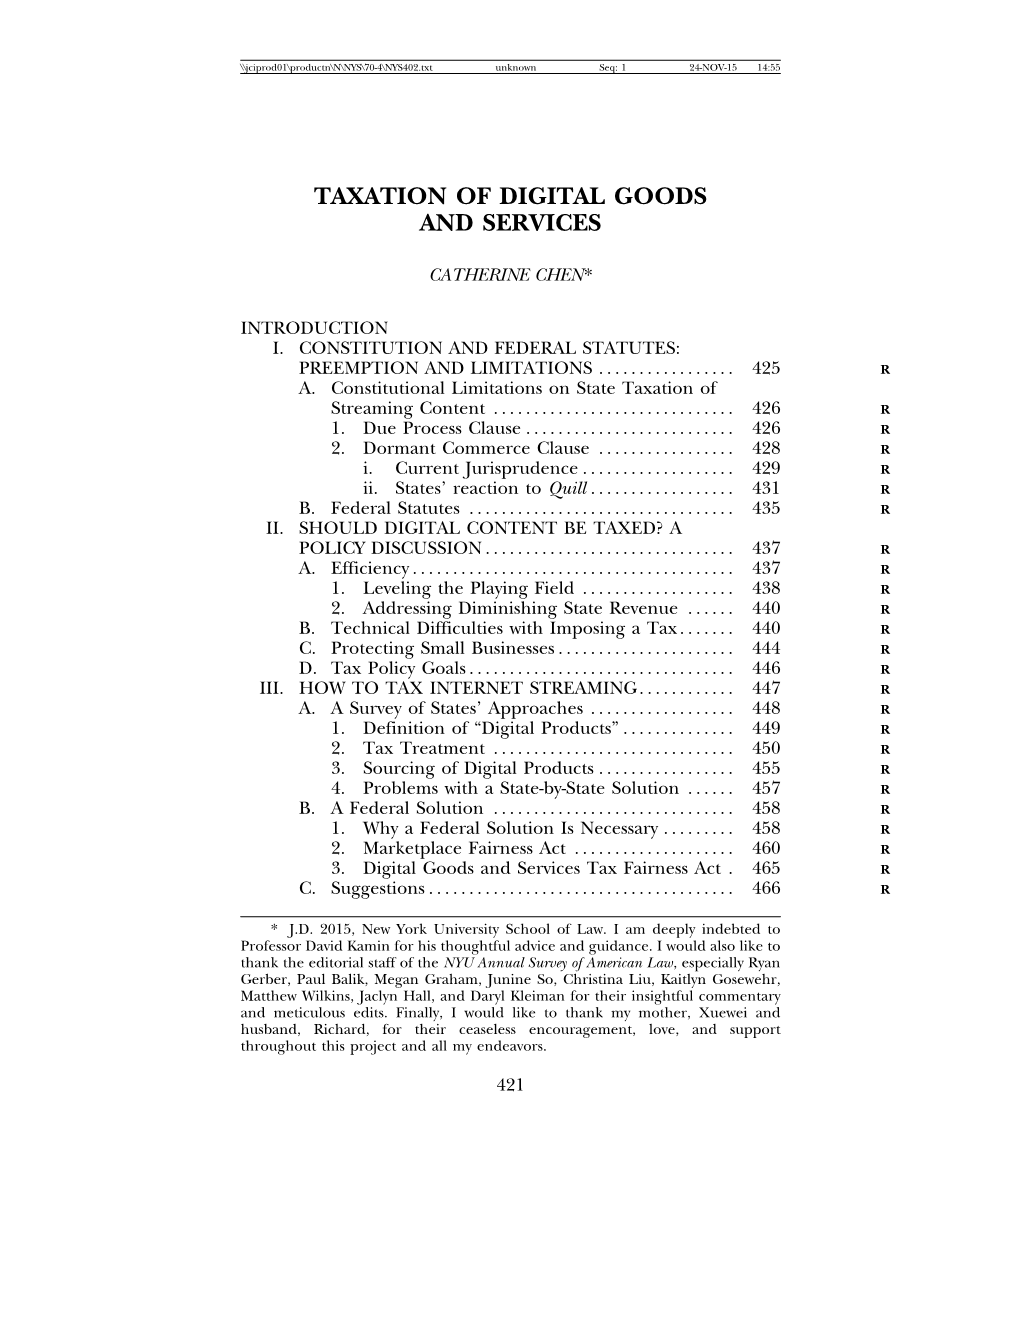 Taxation of Digital Goods and Services